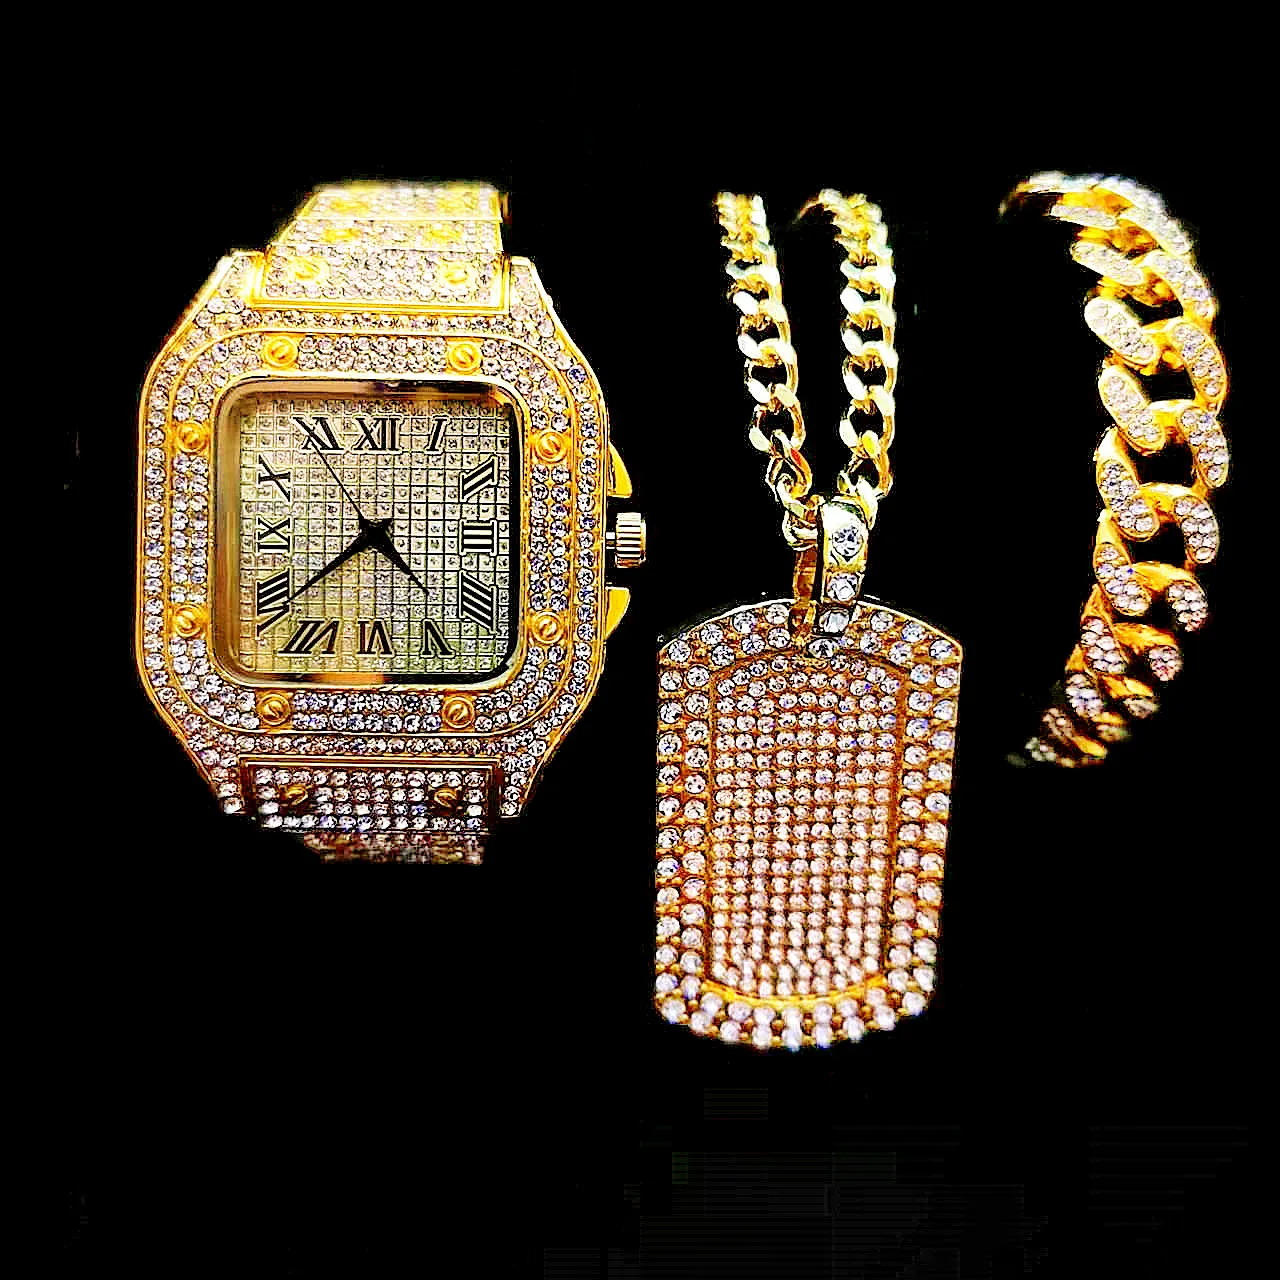 Watch Necklace Bracelet for Men 3pcs Luxury Iced Out Watch Men Bling Cuban Chains Fashion Jewelry Square Pendant Mens Gold Watch 3pcs set storage box silicone mold flower pot round square crystal jewelry epoxy uv gift box jewelry tools moulds